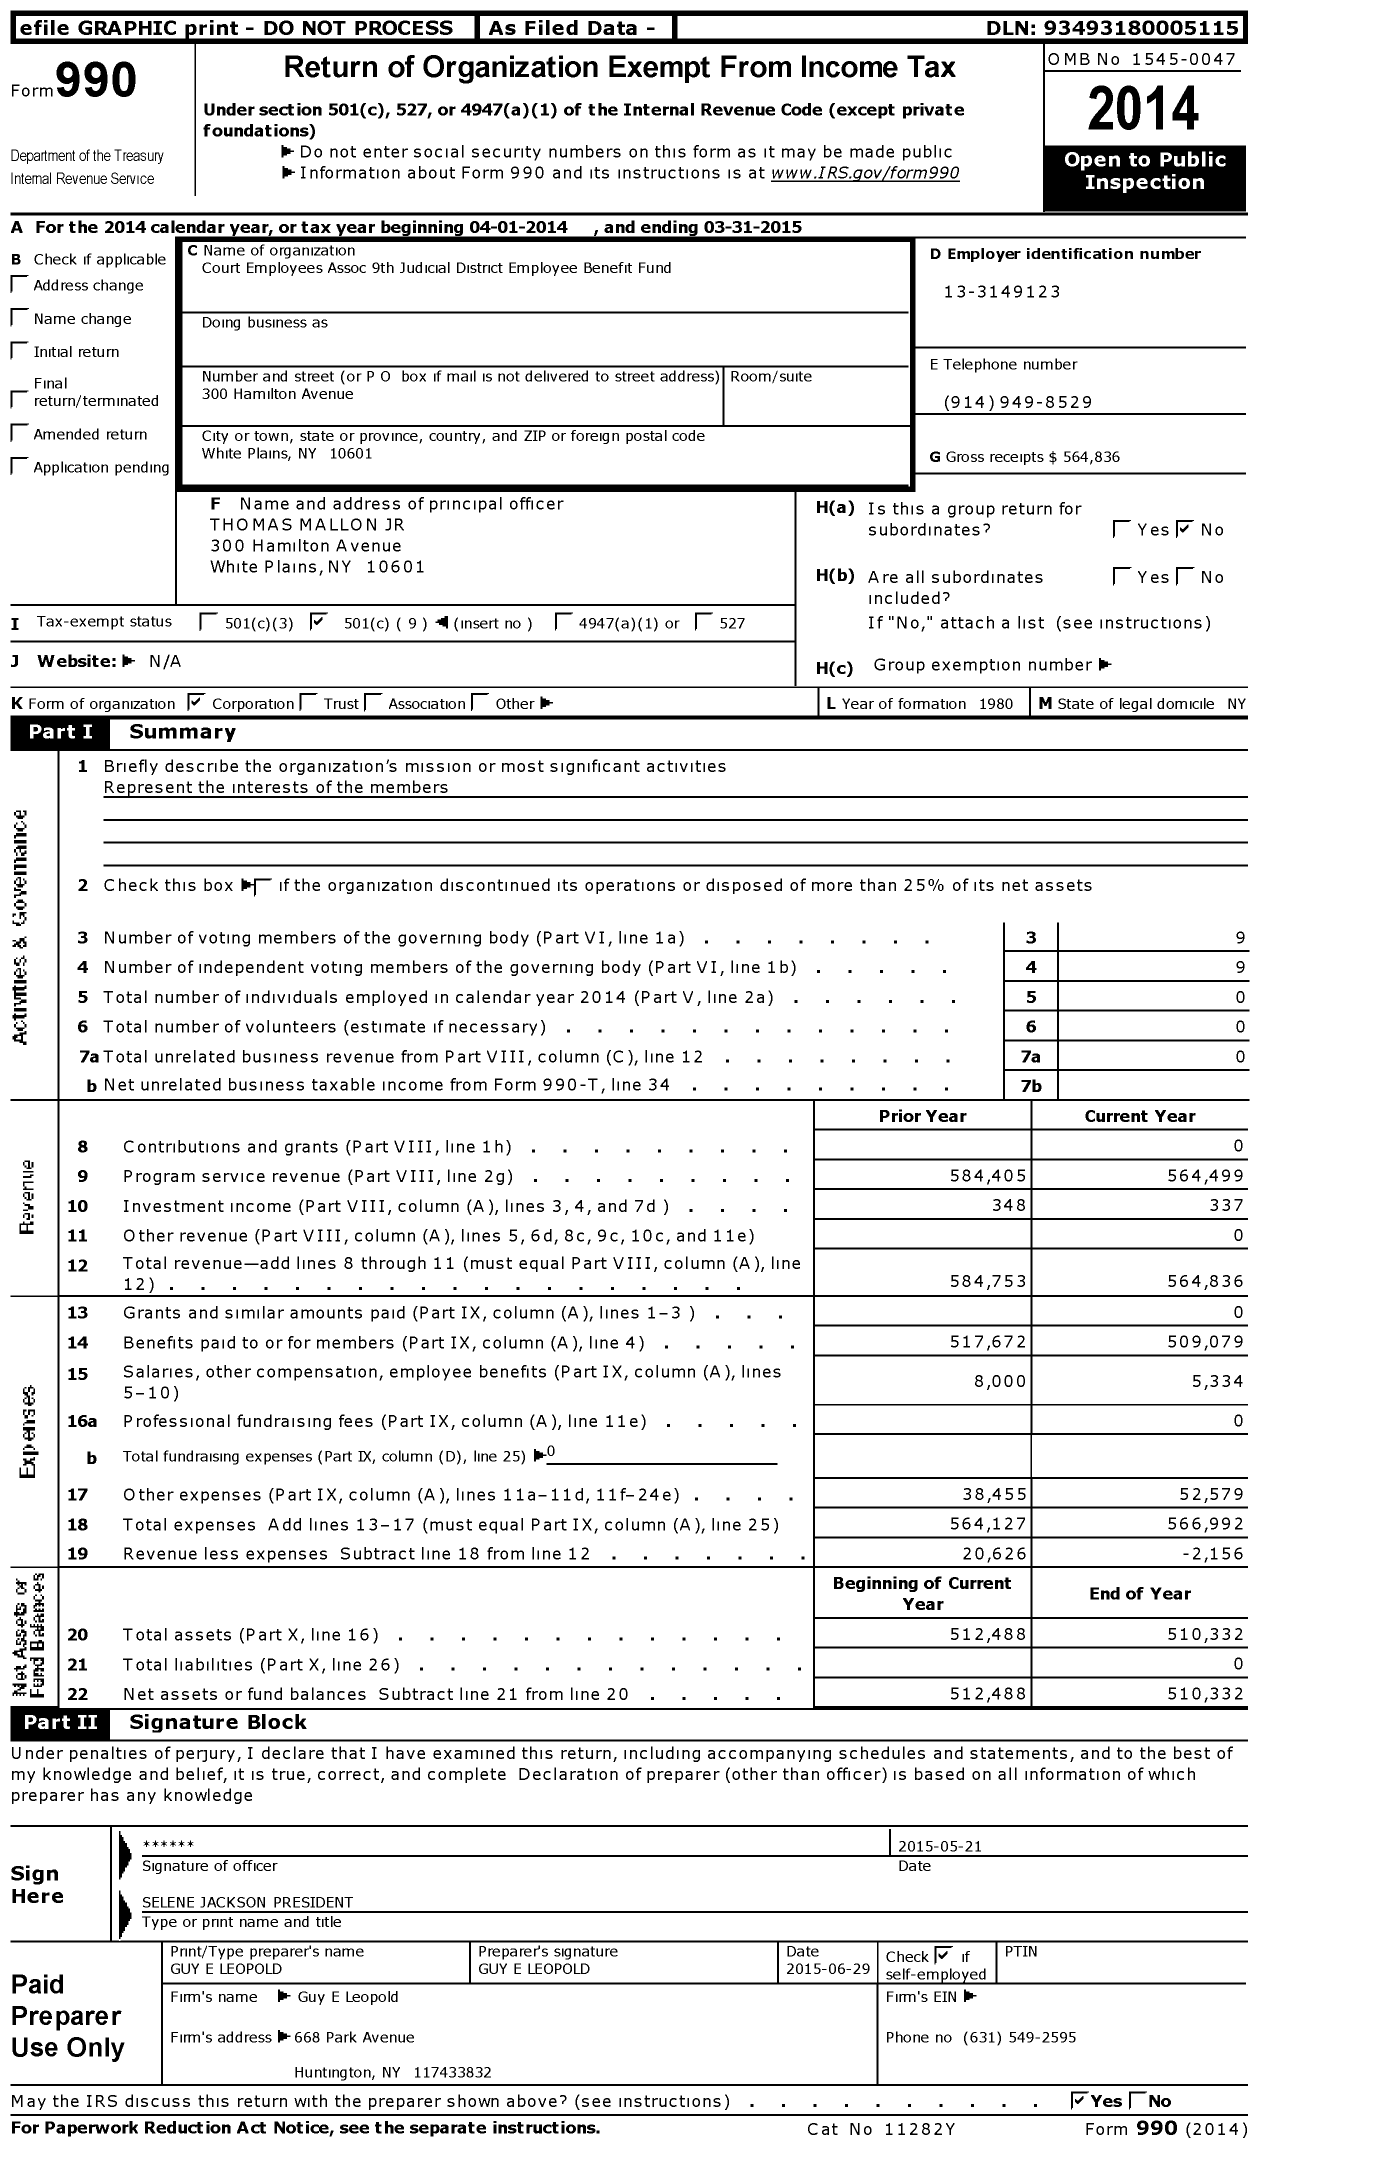 Image of first page of 2014 Form 990O for Court Employees Association 9th Judicial District Employee Benefit Fund